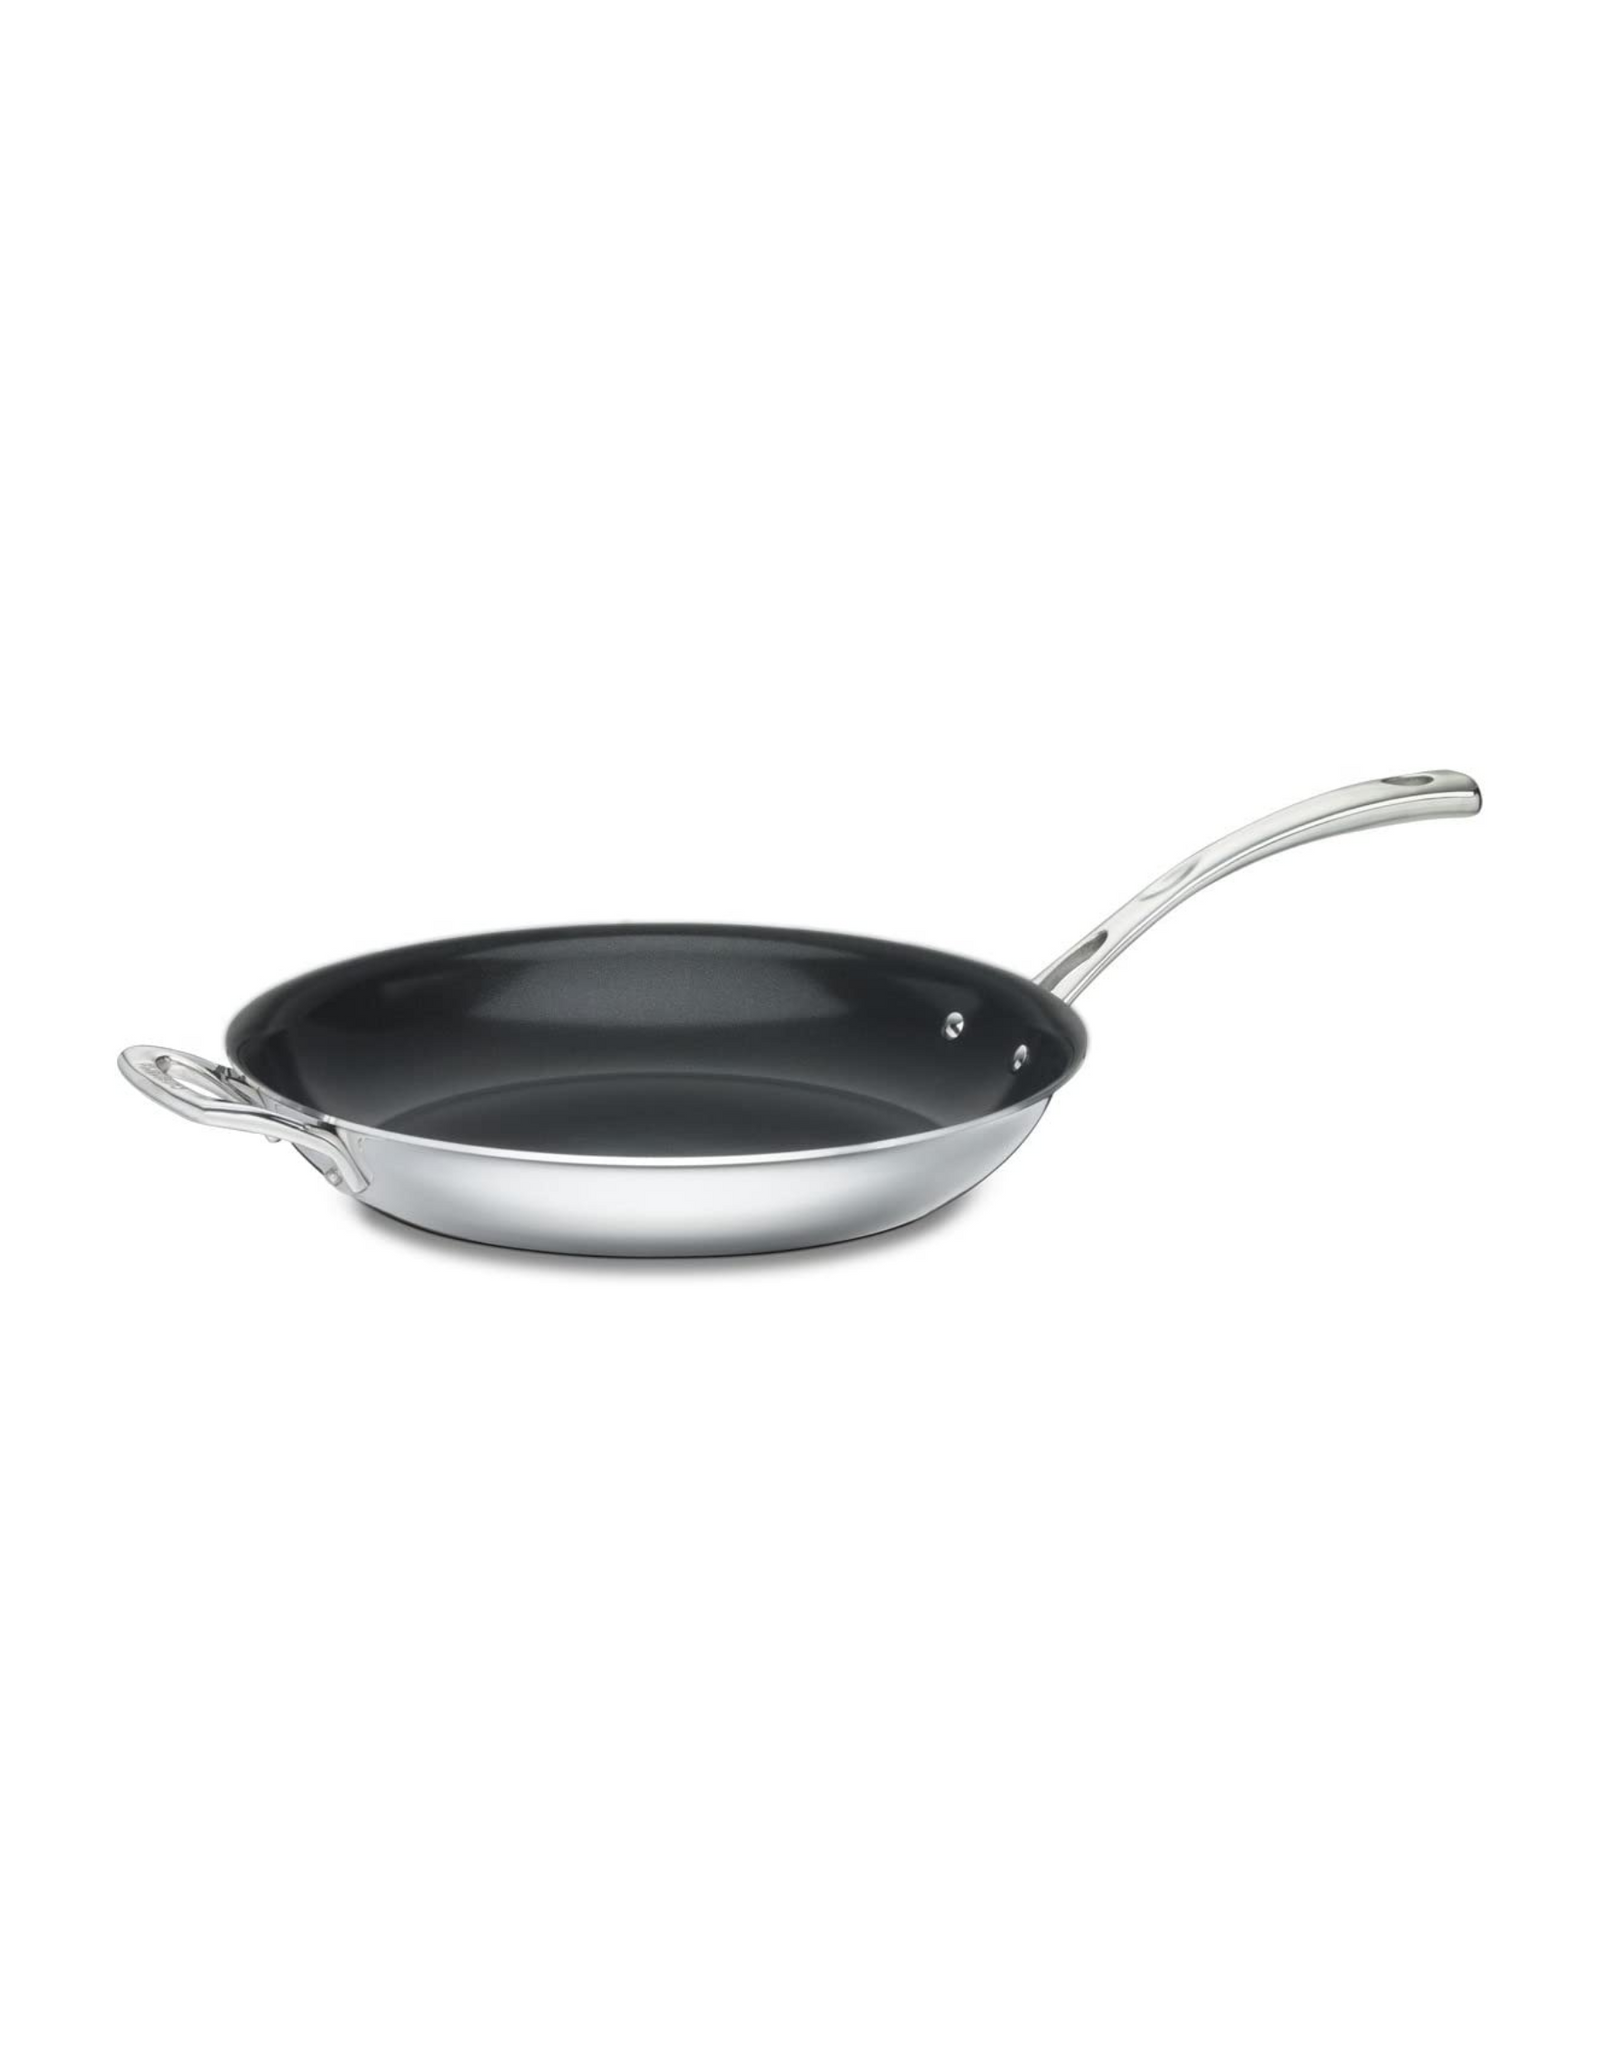 Cuisinart French Classic Tri-Ply Stainless Non-Stick Fry Pan w/ Helper Handle, 12-Inch